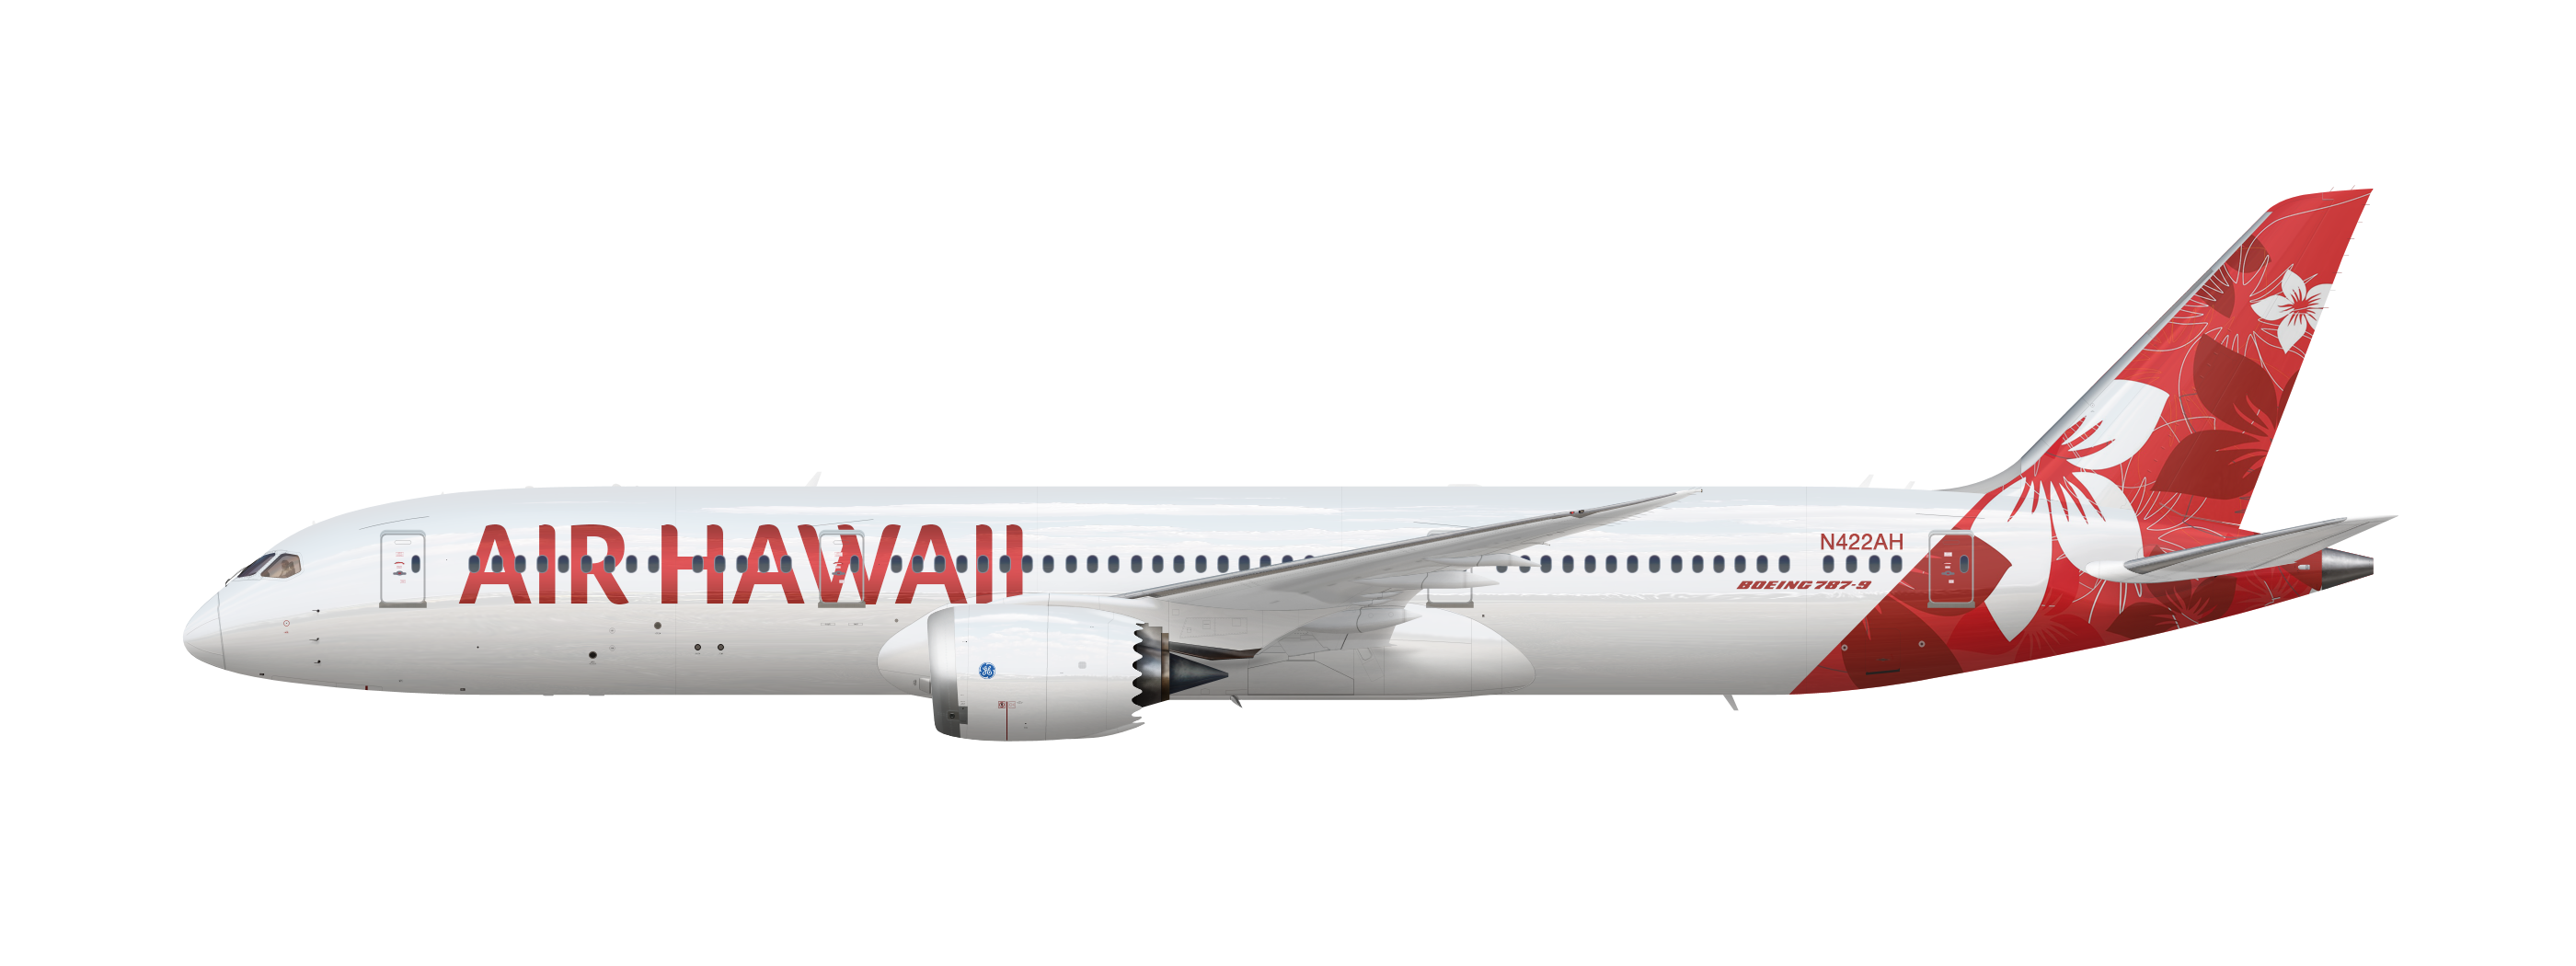 Air Hawaii 787 9 Jets Liveries Gallery Airline Empires